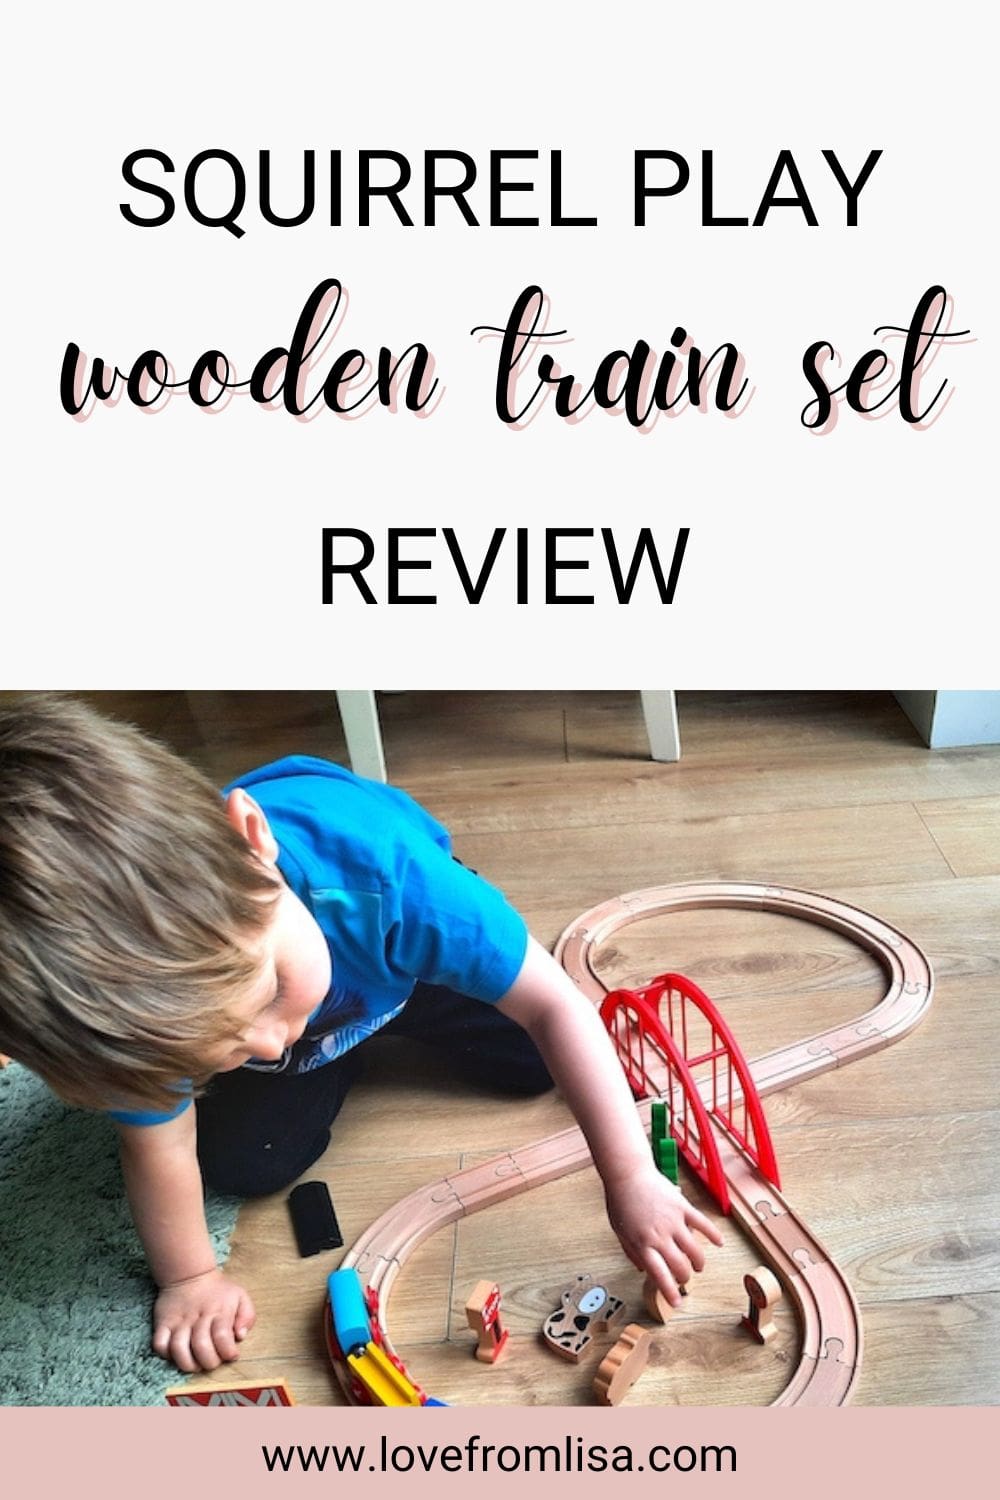 Squirrel Play Wooden Train Set Review